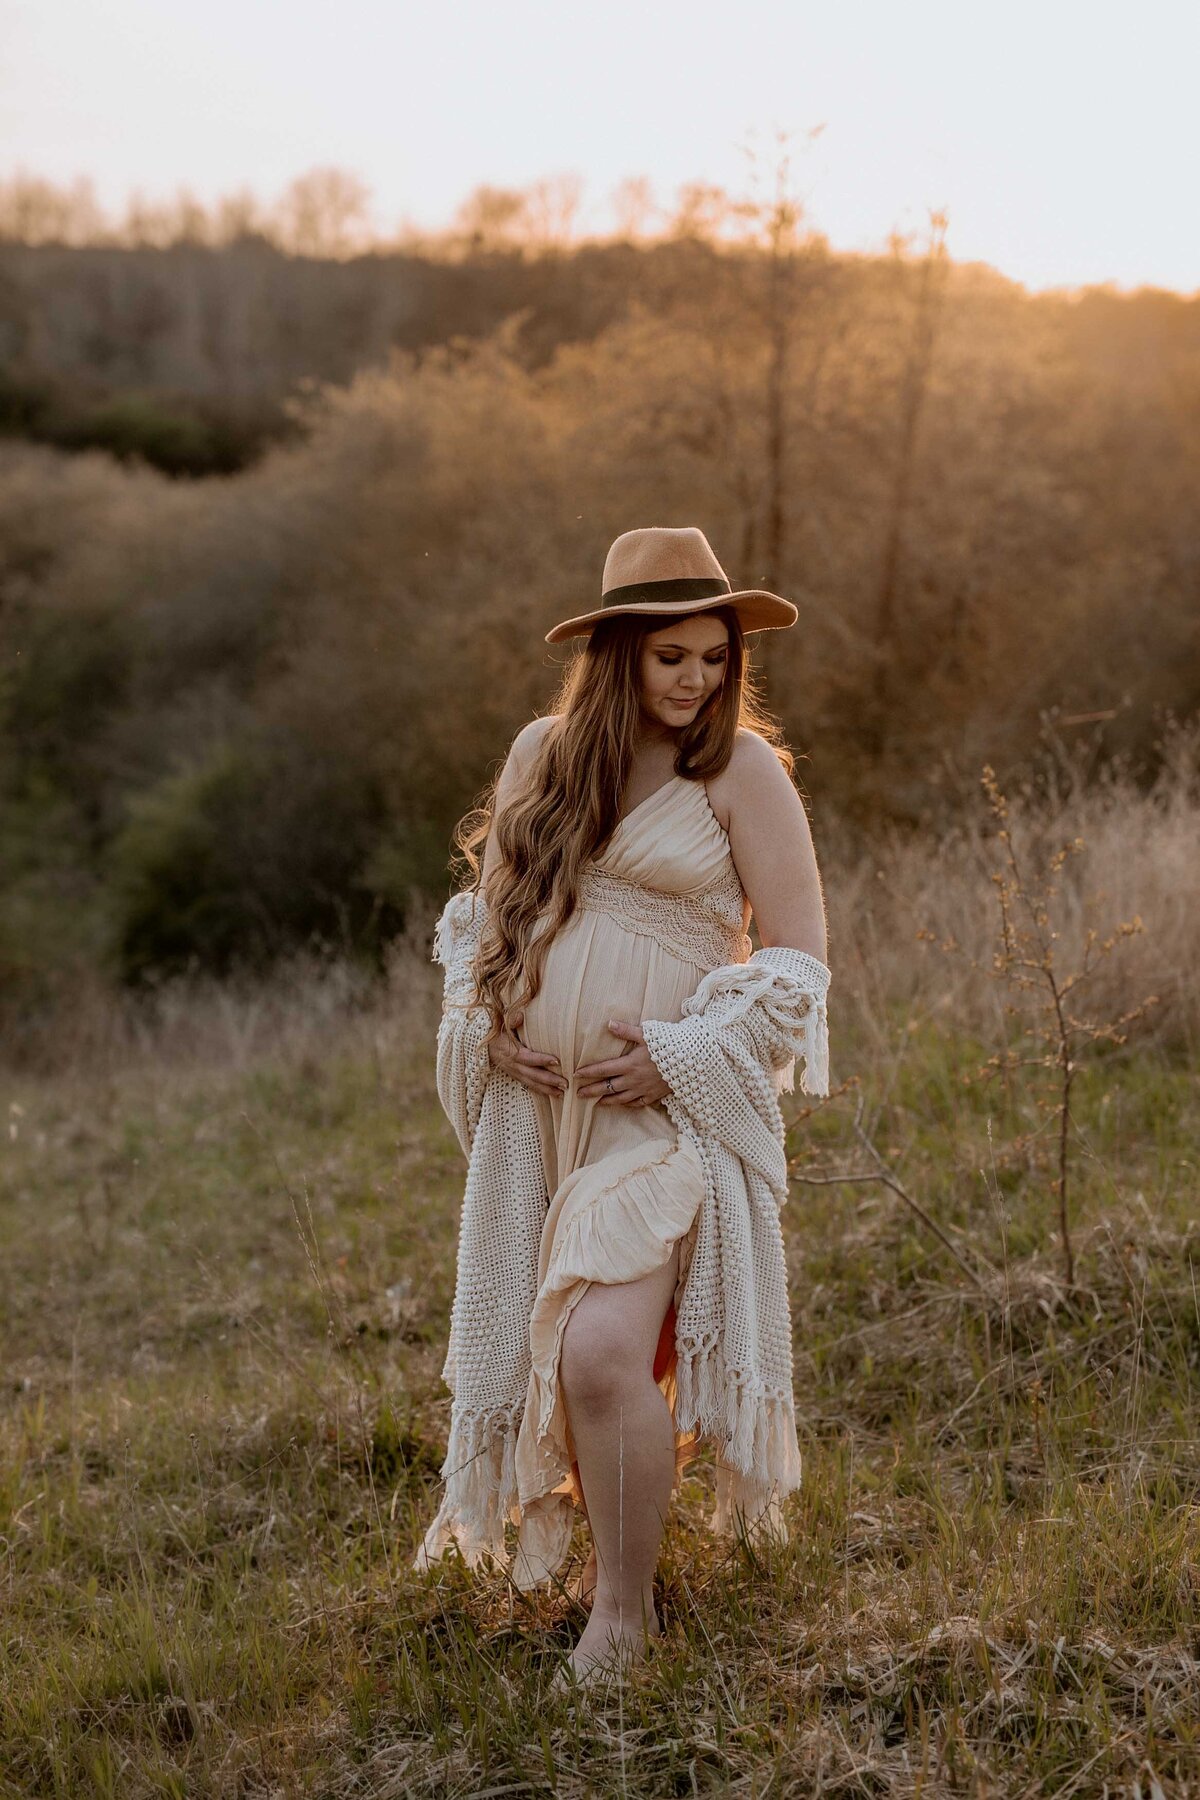 Expectant mom in Exeter, Ontario outdoor maternity photoshoot. Mom is standing barefoot on the grasses in a cream dress and camel felt hat. She is touching her bump and looking down over her shoulder with sun haze in the background.